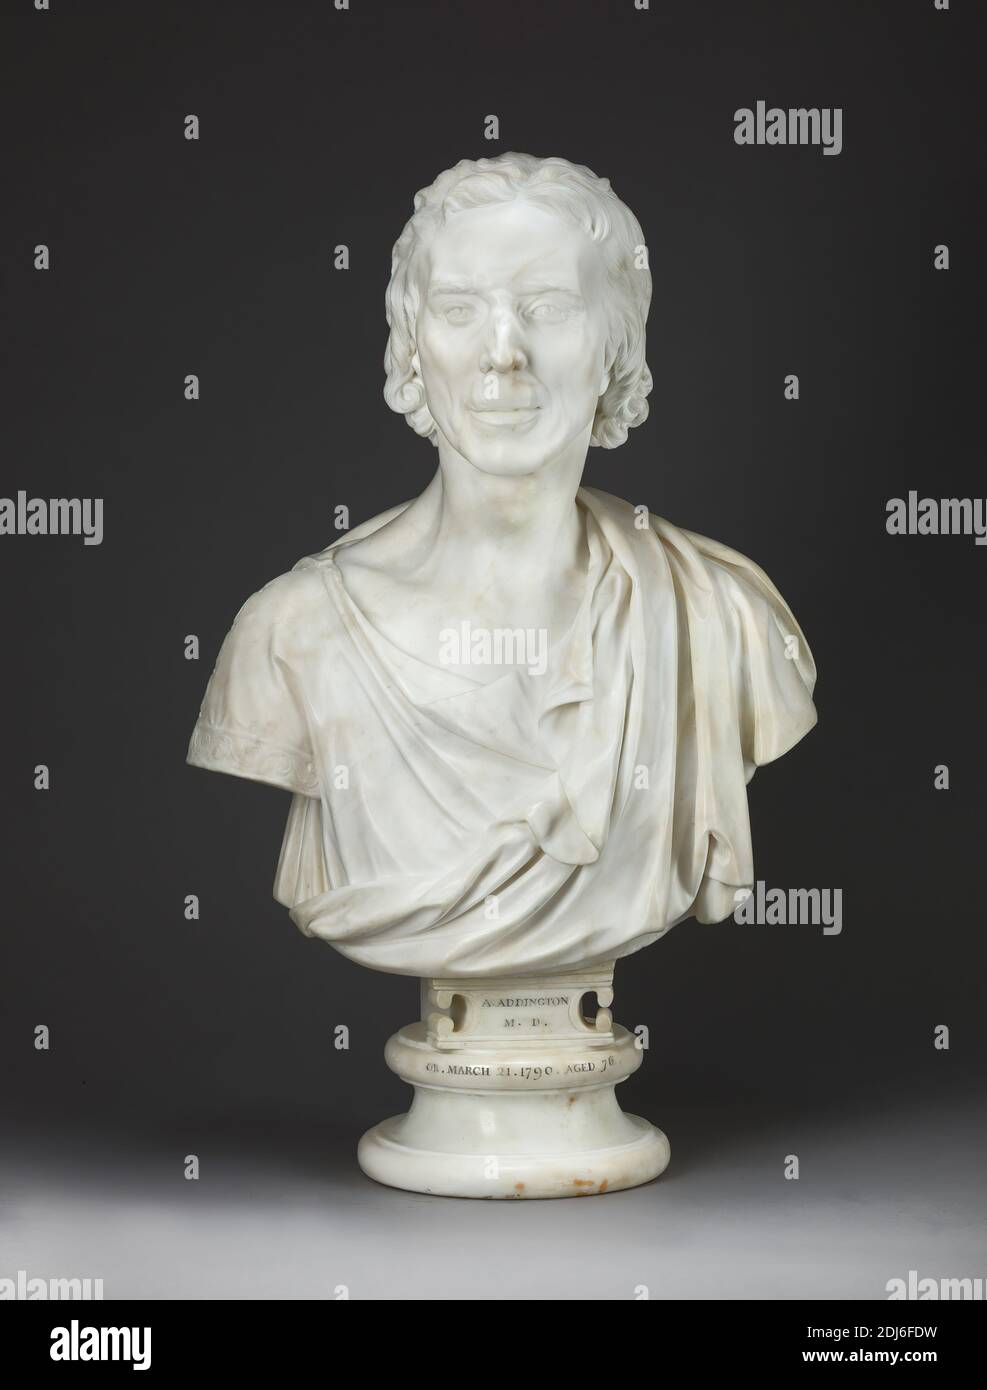 Dr. Anthony Addington, Thomas Banks, 1735–1805, British, 1790, Marble, Overall: 29 1/8 × 17 15/16 × 10 1/16 inches (74 × 45.5 × 25.5 cm), marble, physician, portrait, sculpture Stock Photo